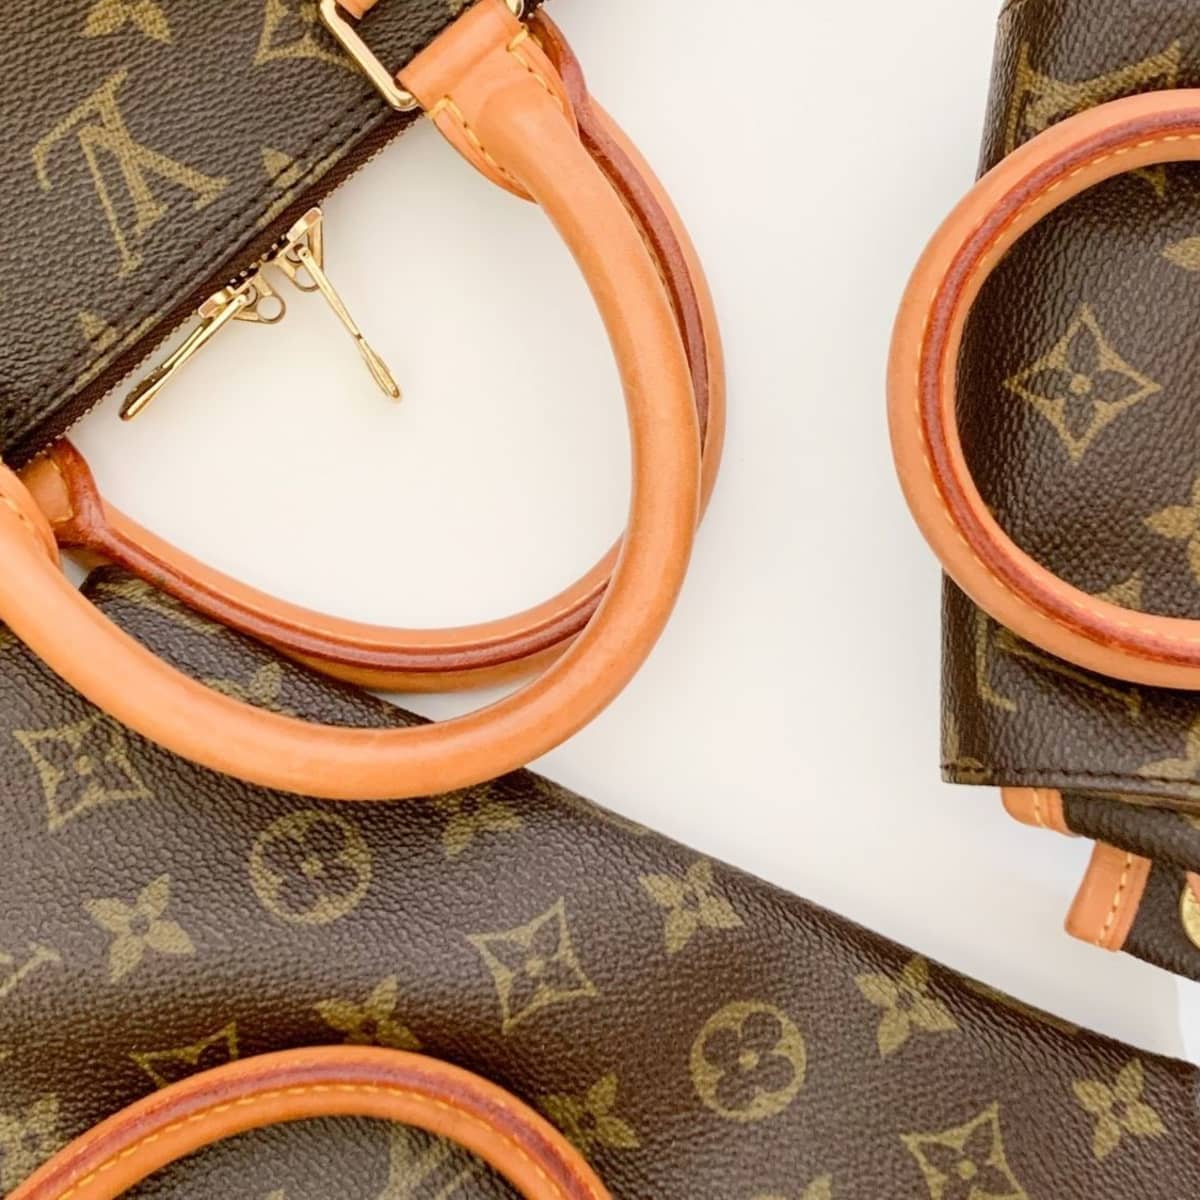 11 Ways to Spot a Fake Louis Belt to Avoid Getting Scammed